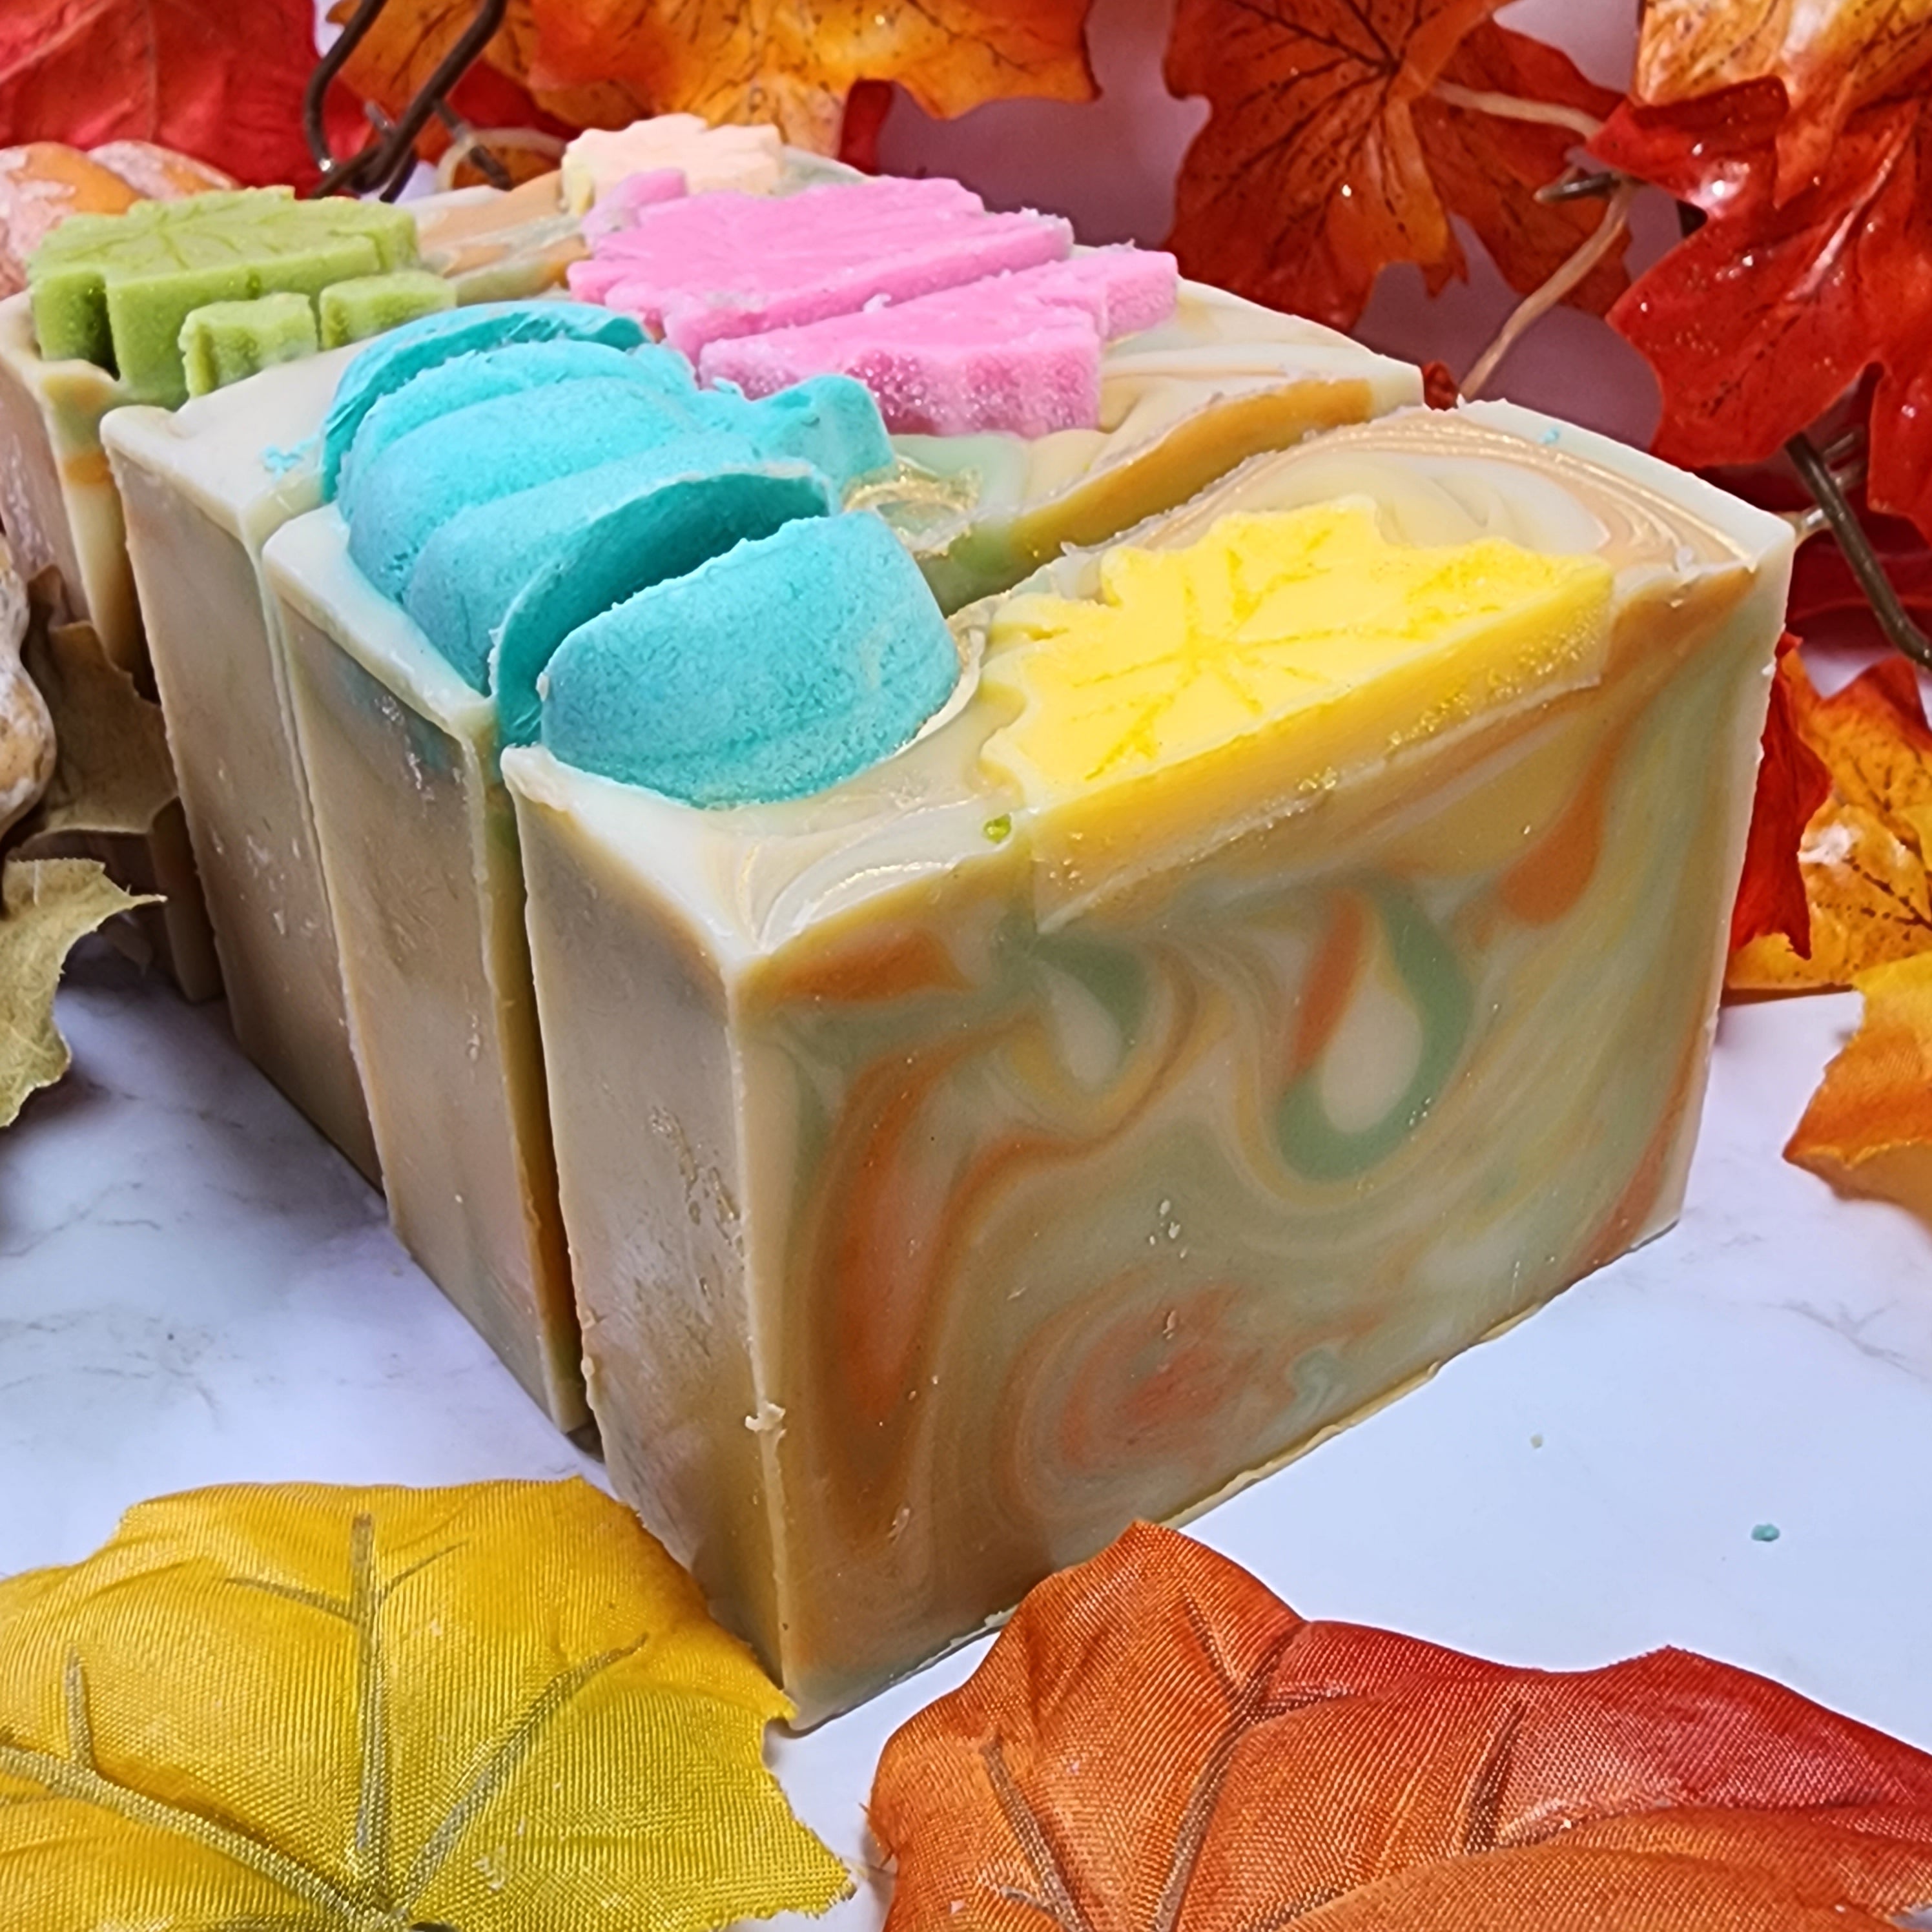 Fall Foliage Soap Bar Diana's Candles and Soaps 